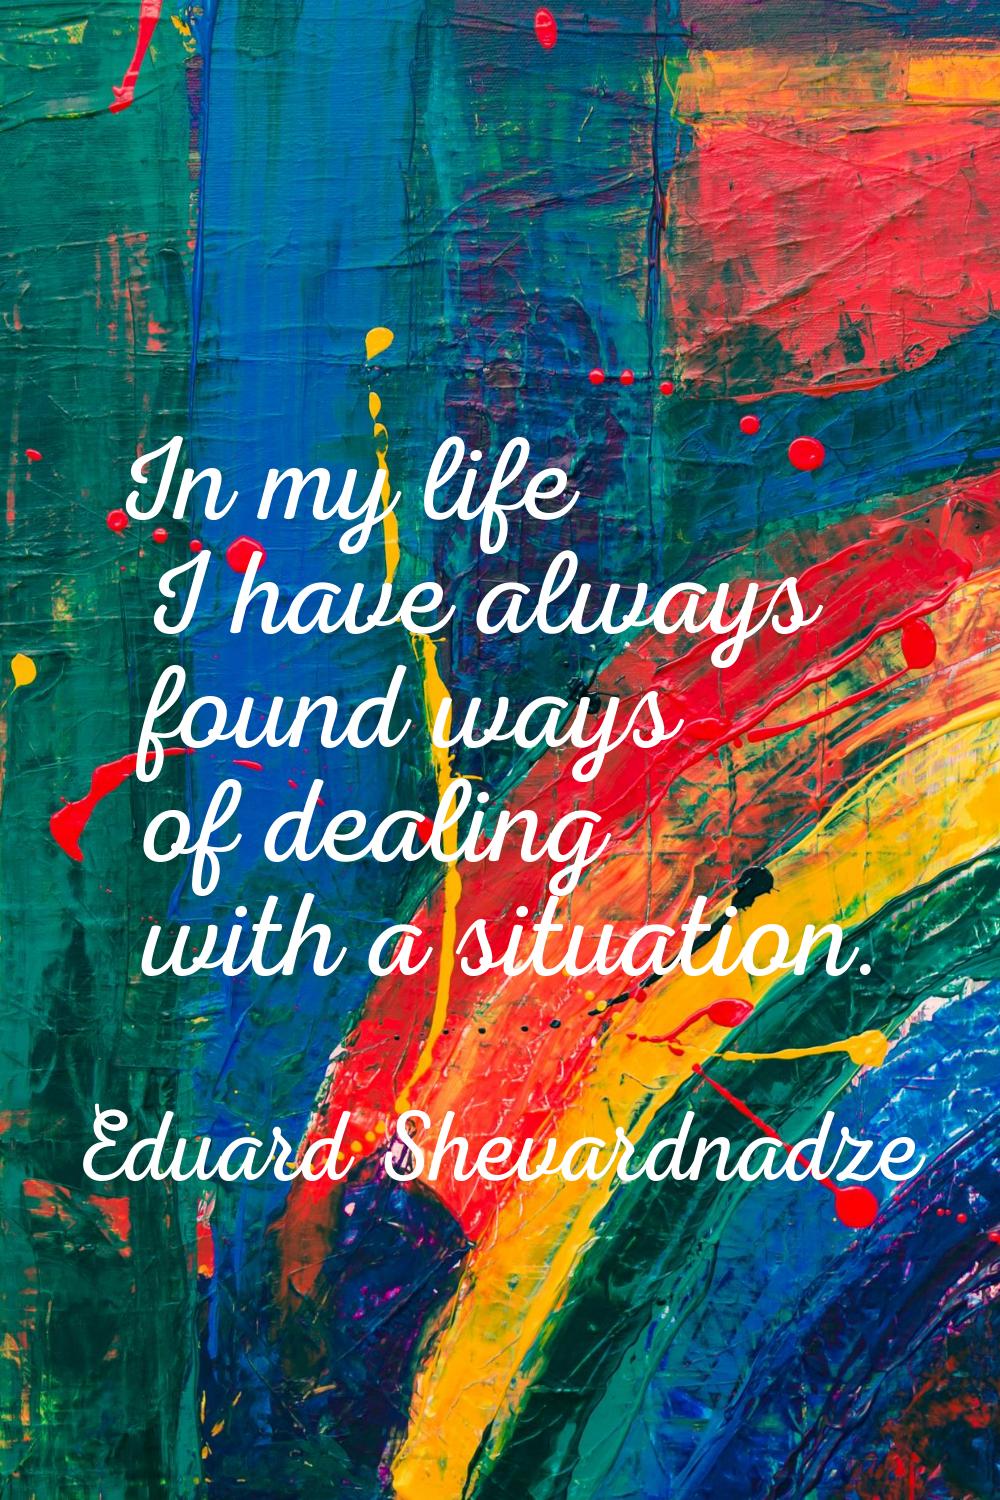 In my life I have always found ways of dealing with a situation.